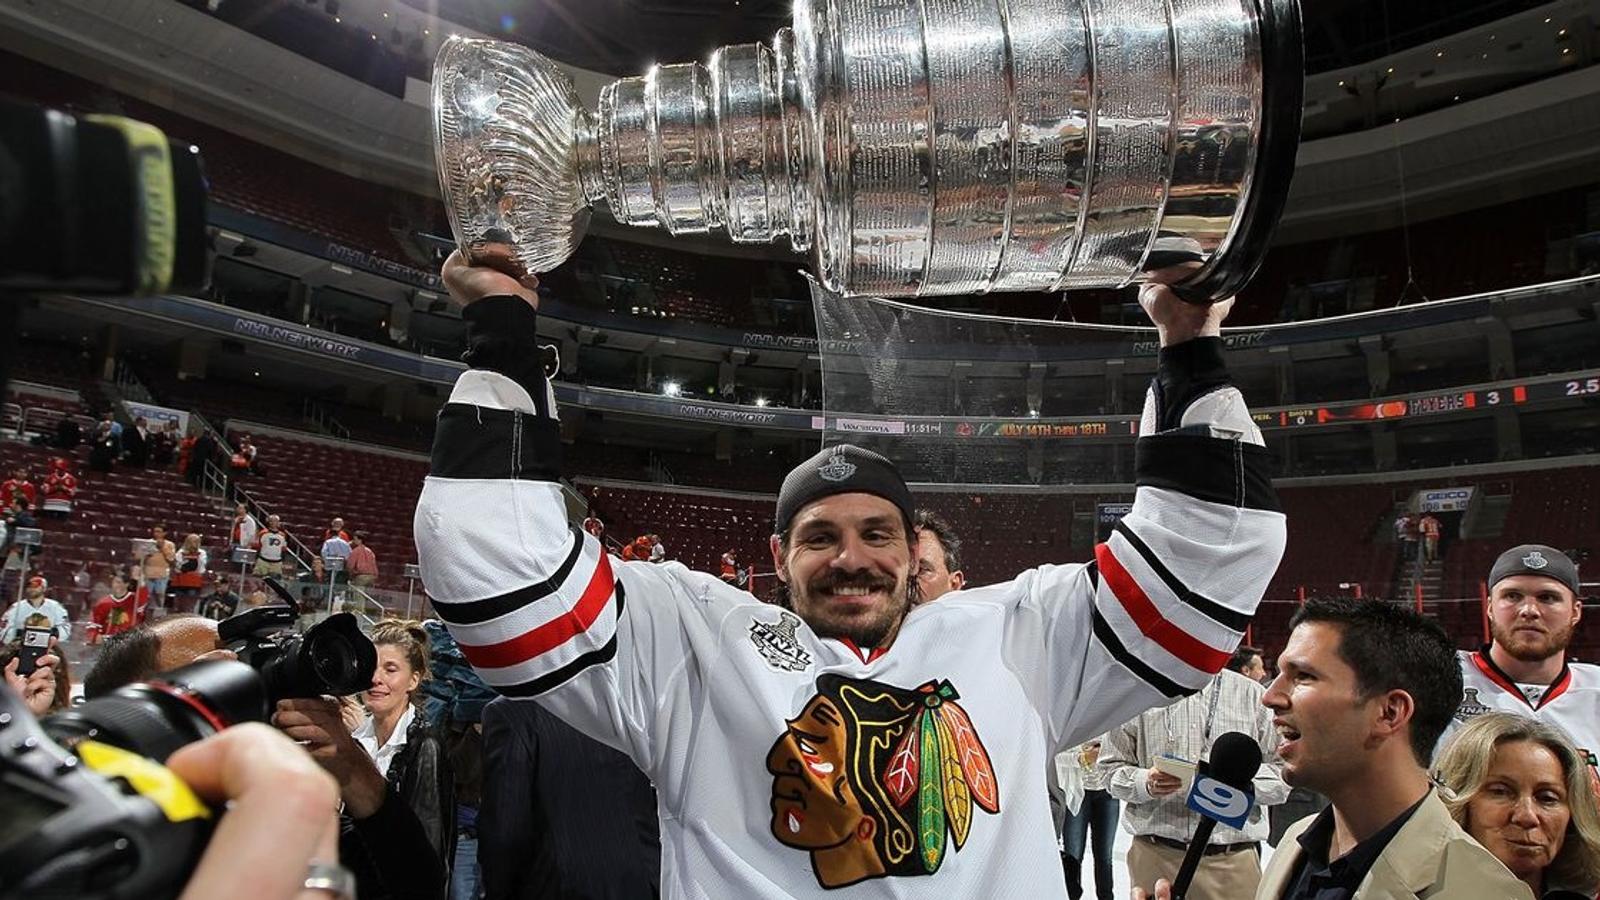 Former Blackhawk speaks out publicly about sexual assault allegations in Chicago, calls for “jail.”